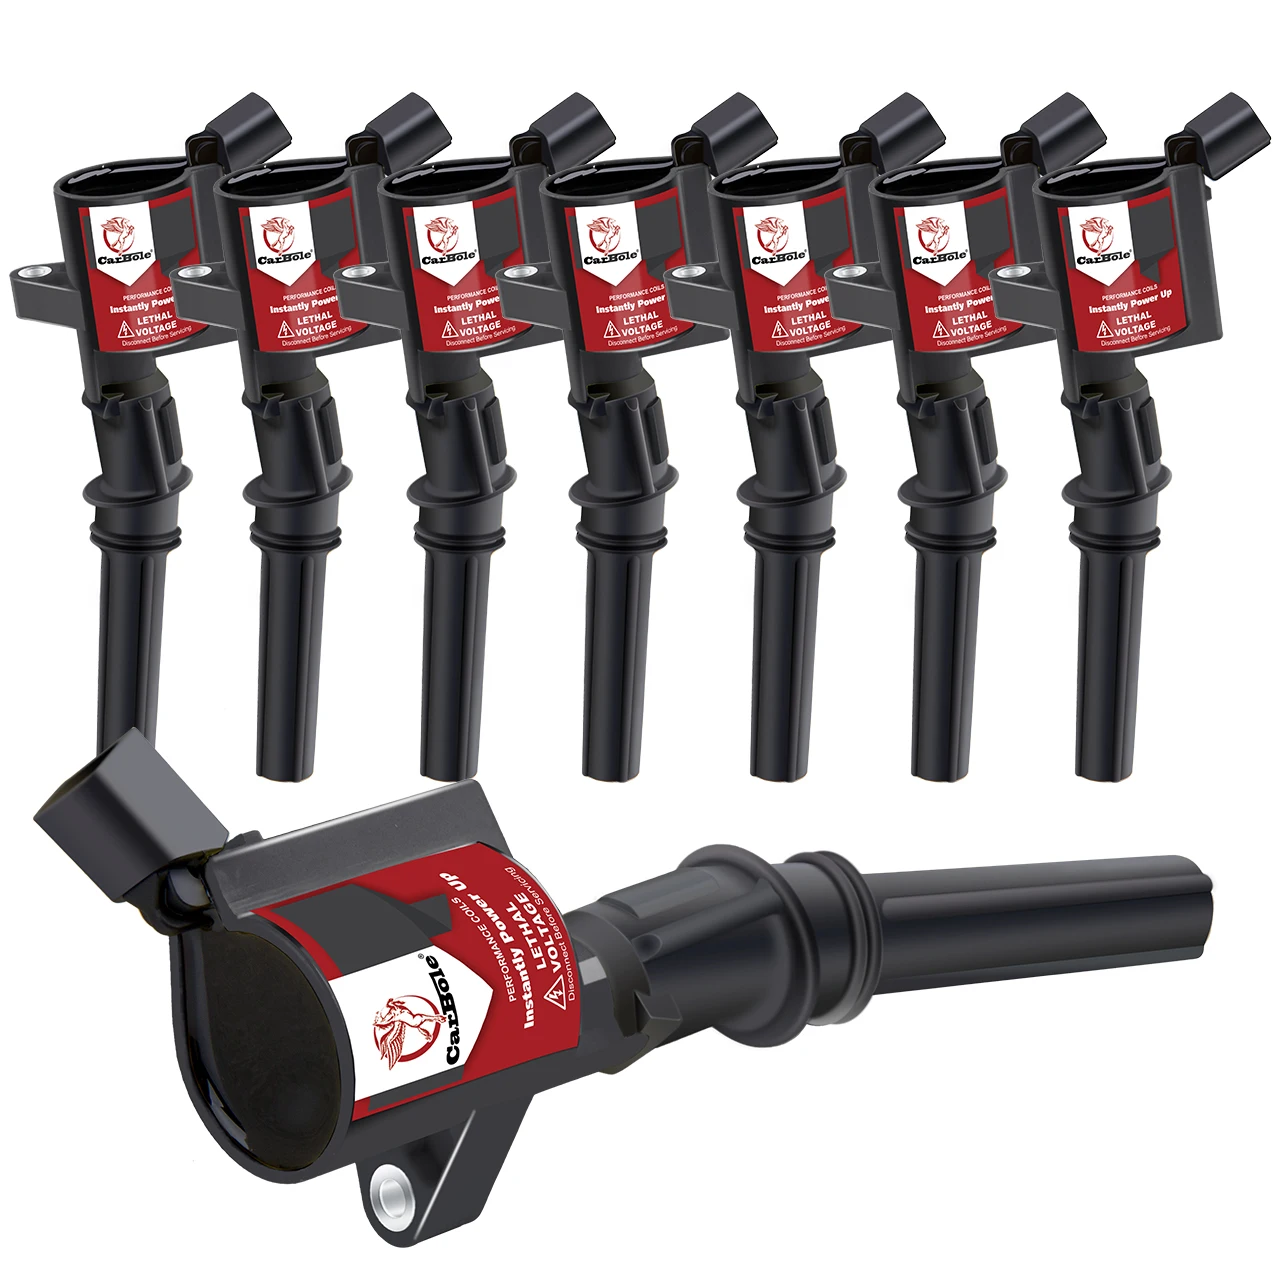 PACK of 8 Ignition Coil 15% More Energy F150 for Ford Lincoln Mercury 4.6L 5.4L V8 Compatible with DG508 C1454 C1417 FD503 